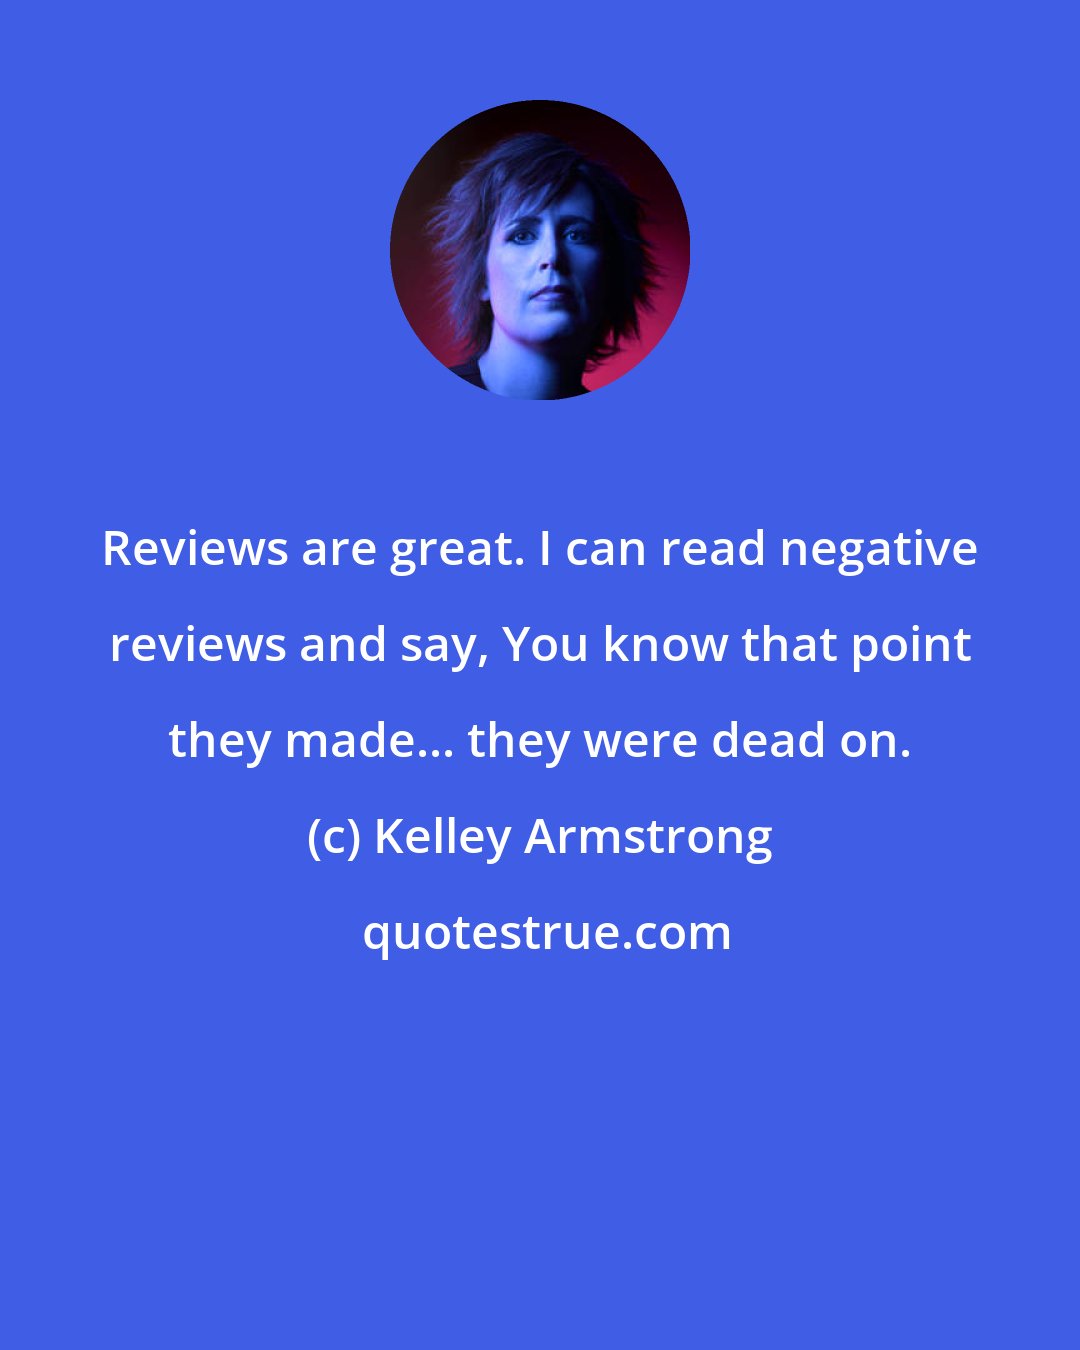 Kelley Armstrong: Reviews are great. I can read negative reviews and say, You know that point they made... they were dead on.